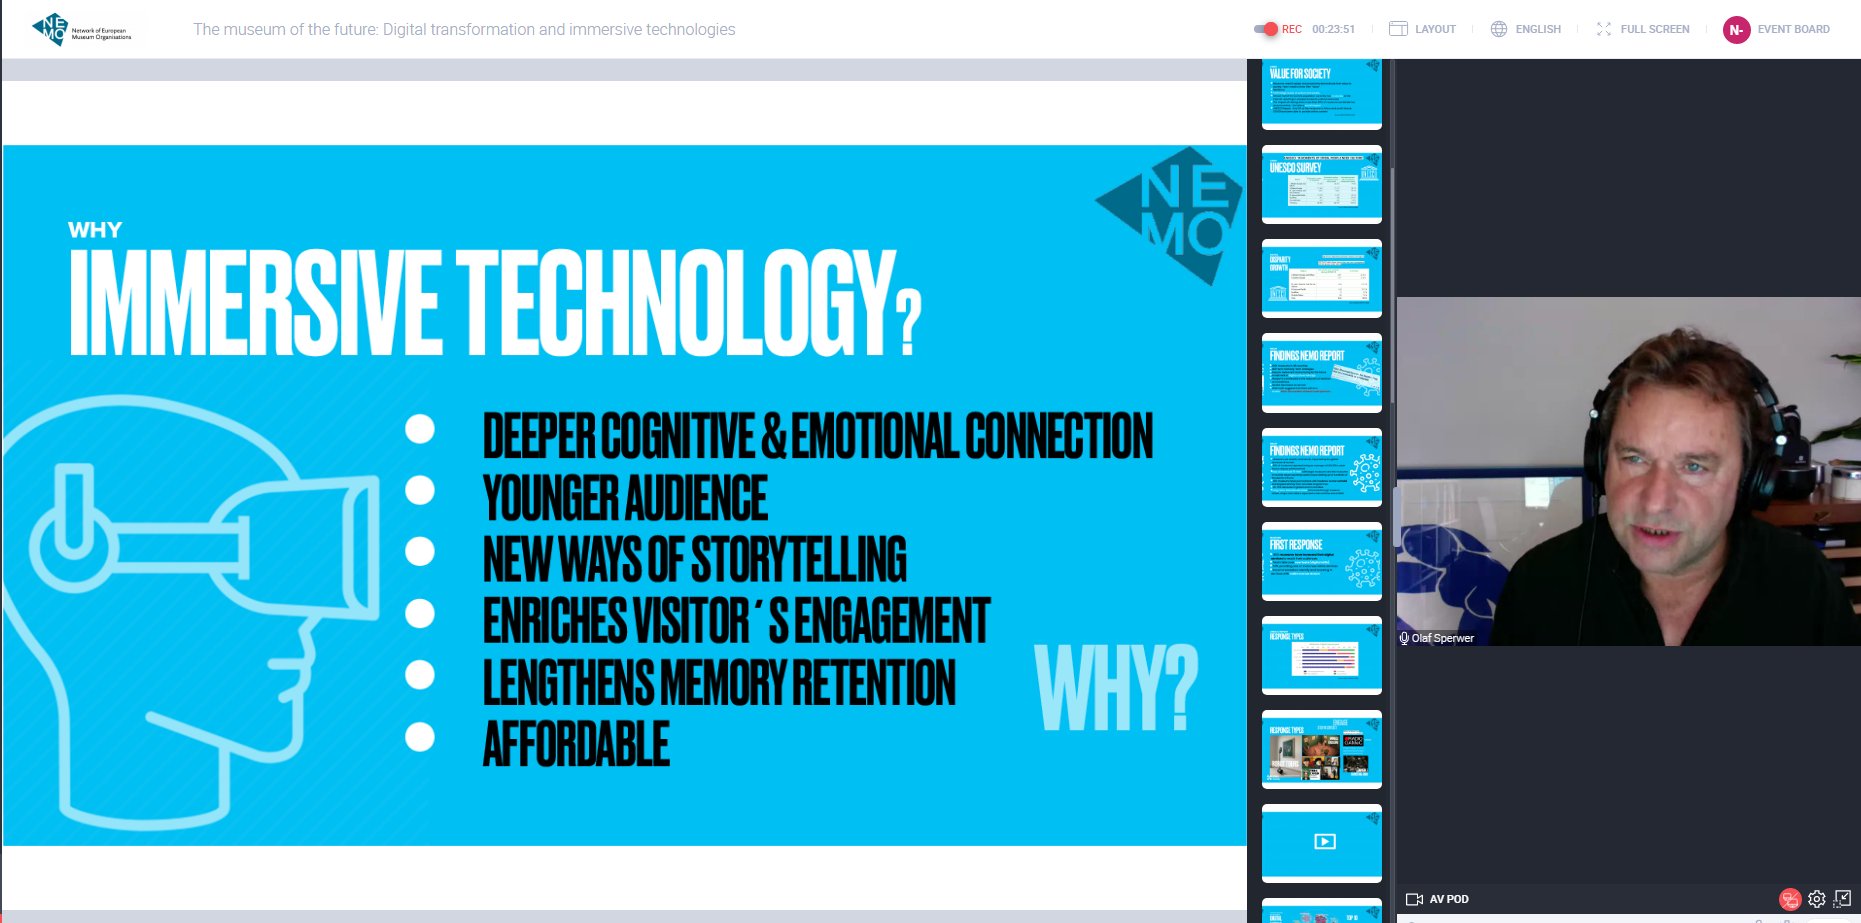  Screenshot of an online presentation. On the left side are the presentation slides on immersive technology. On the right side is a video of the speaker.